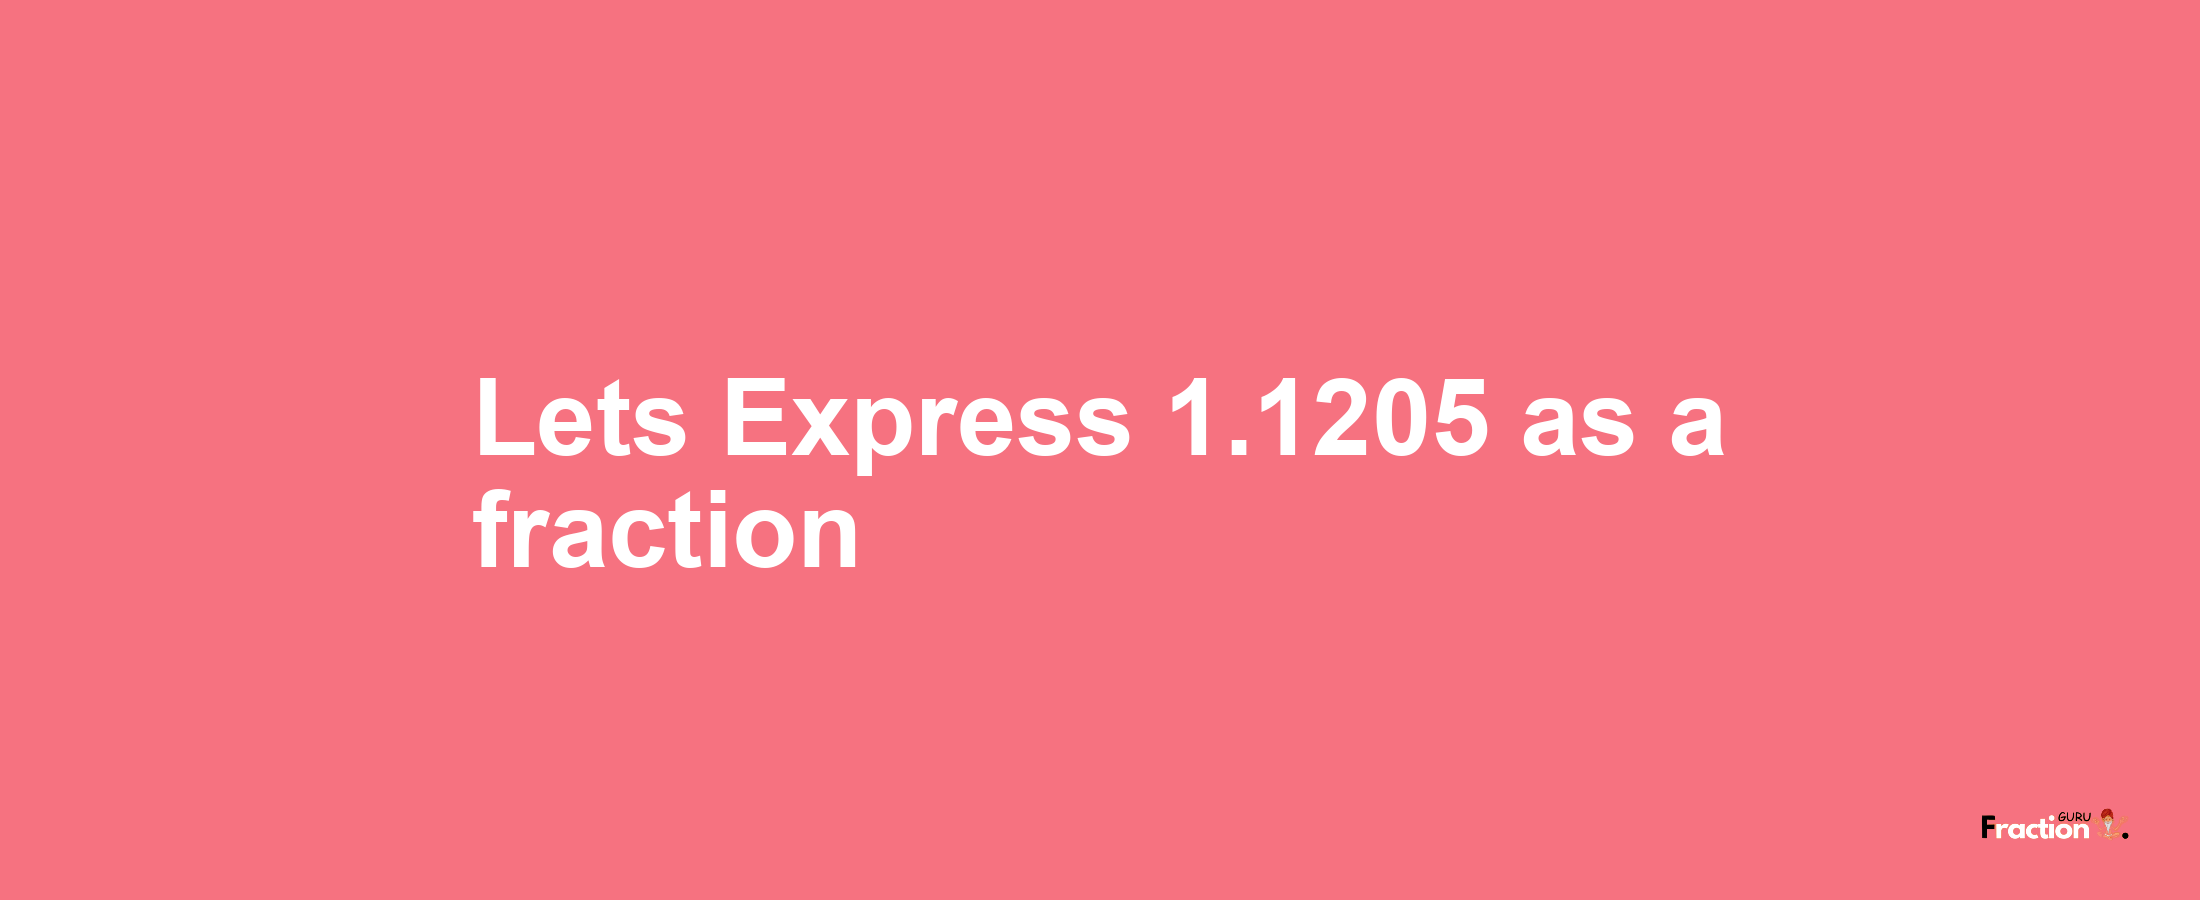 Lets Express 1.1205 as afraction